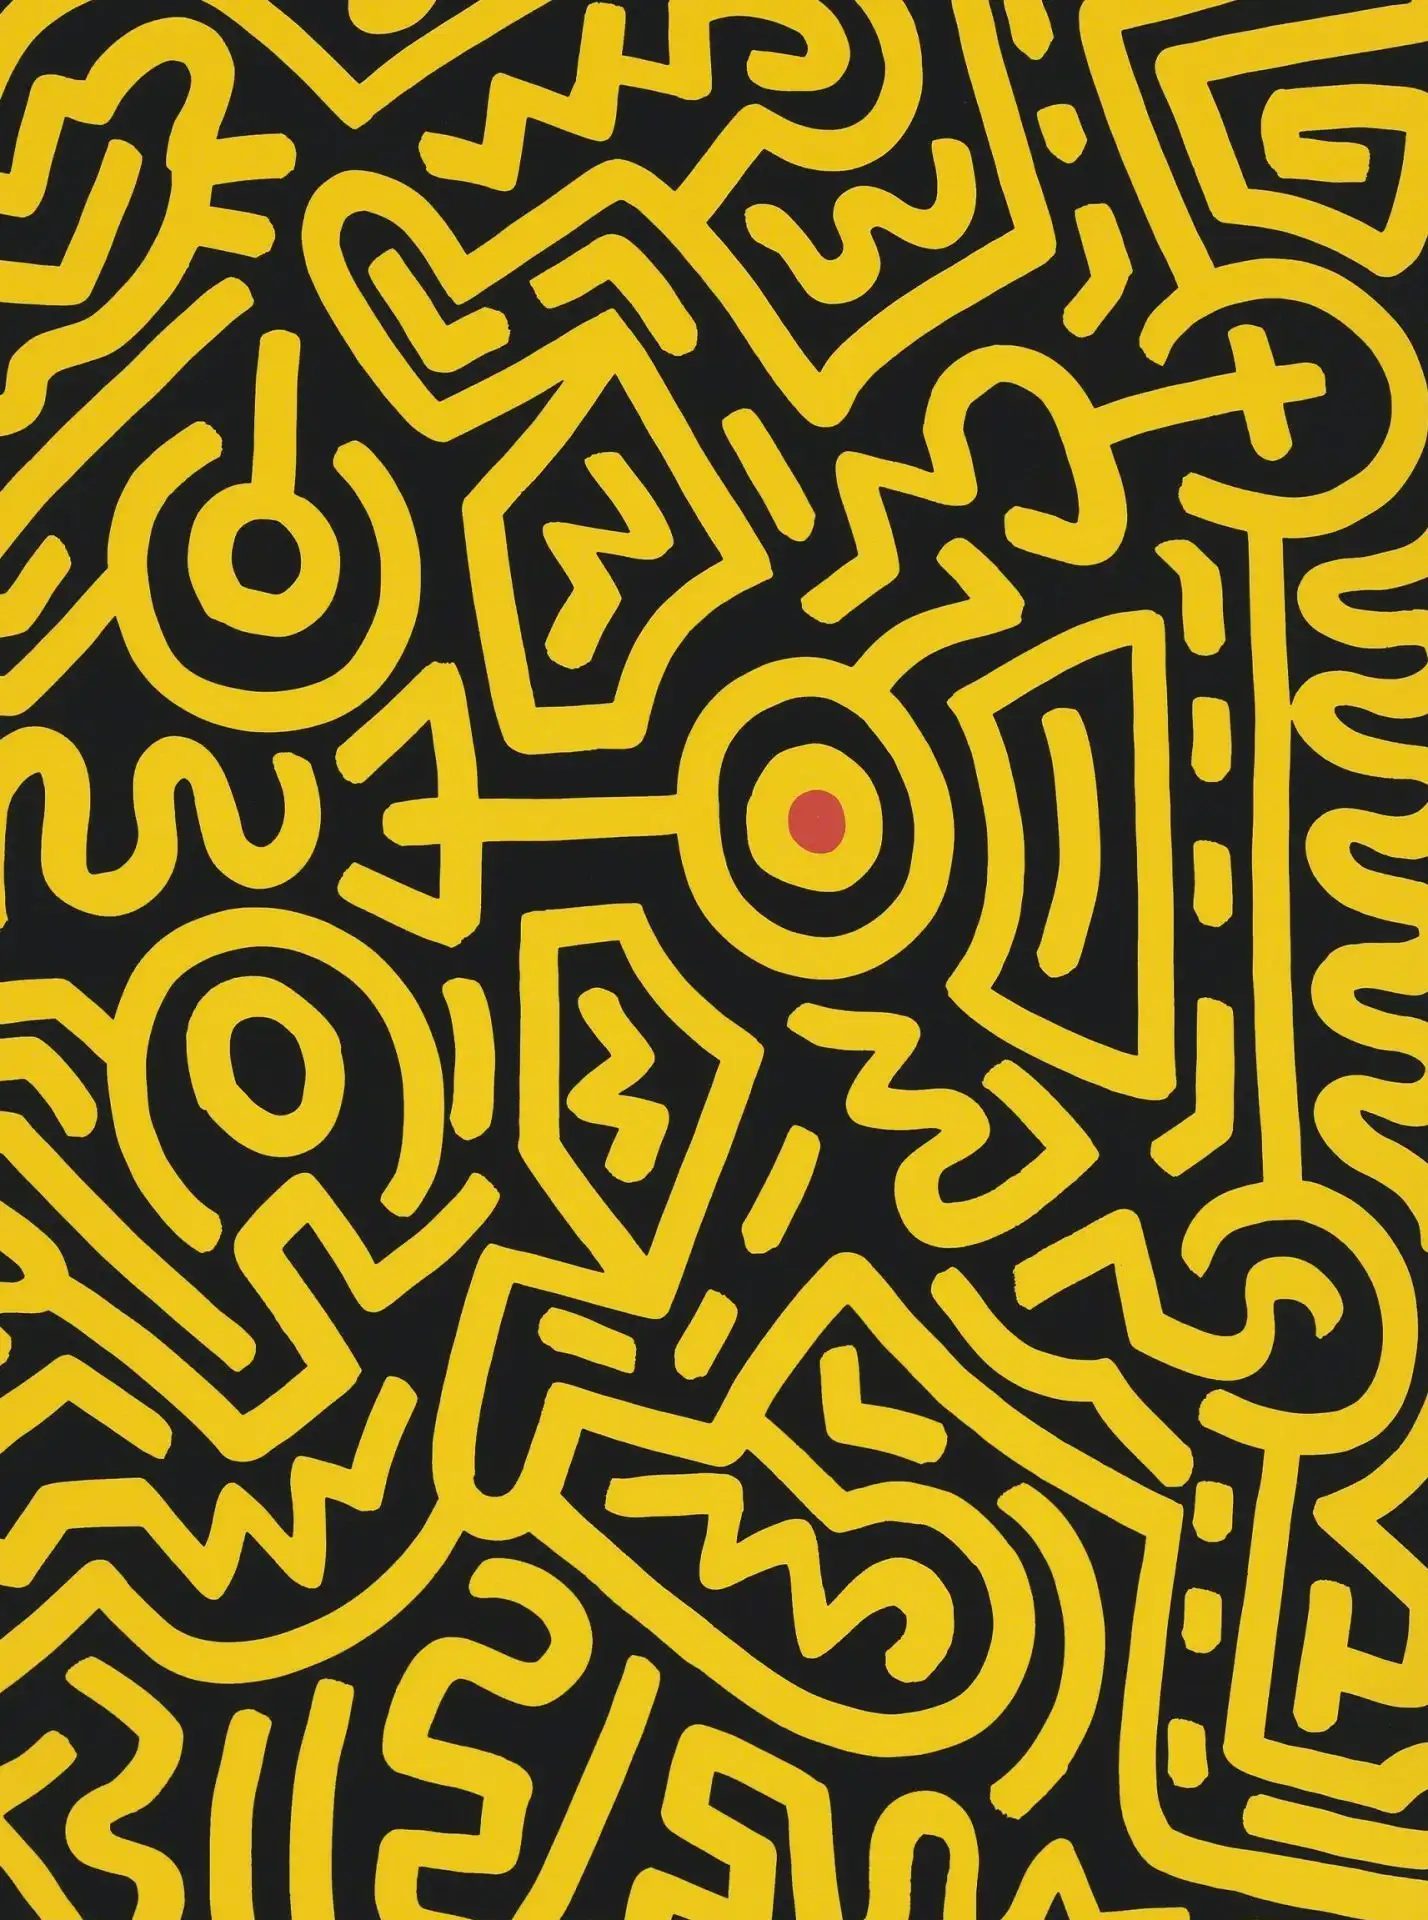 Redmi K30 Pro Keith Haring wallpapers are here  GSMArenacom news